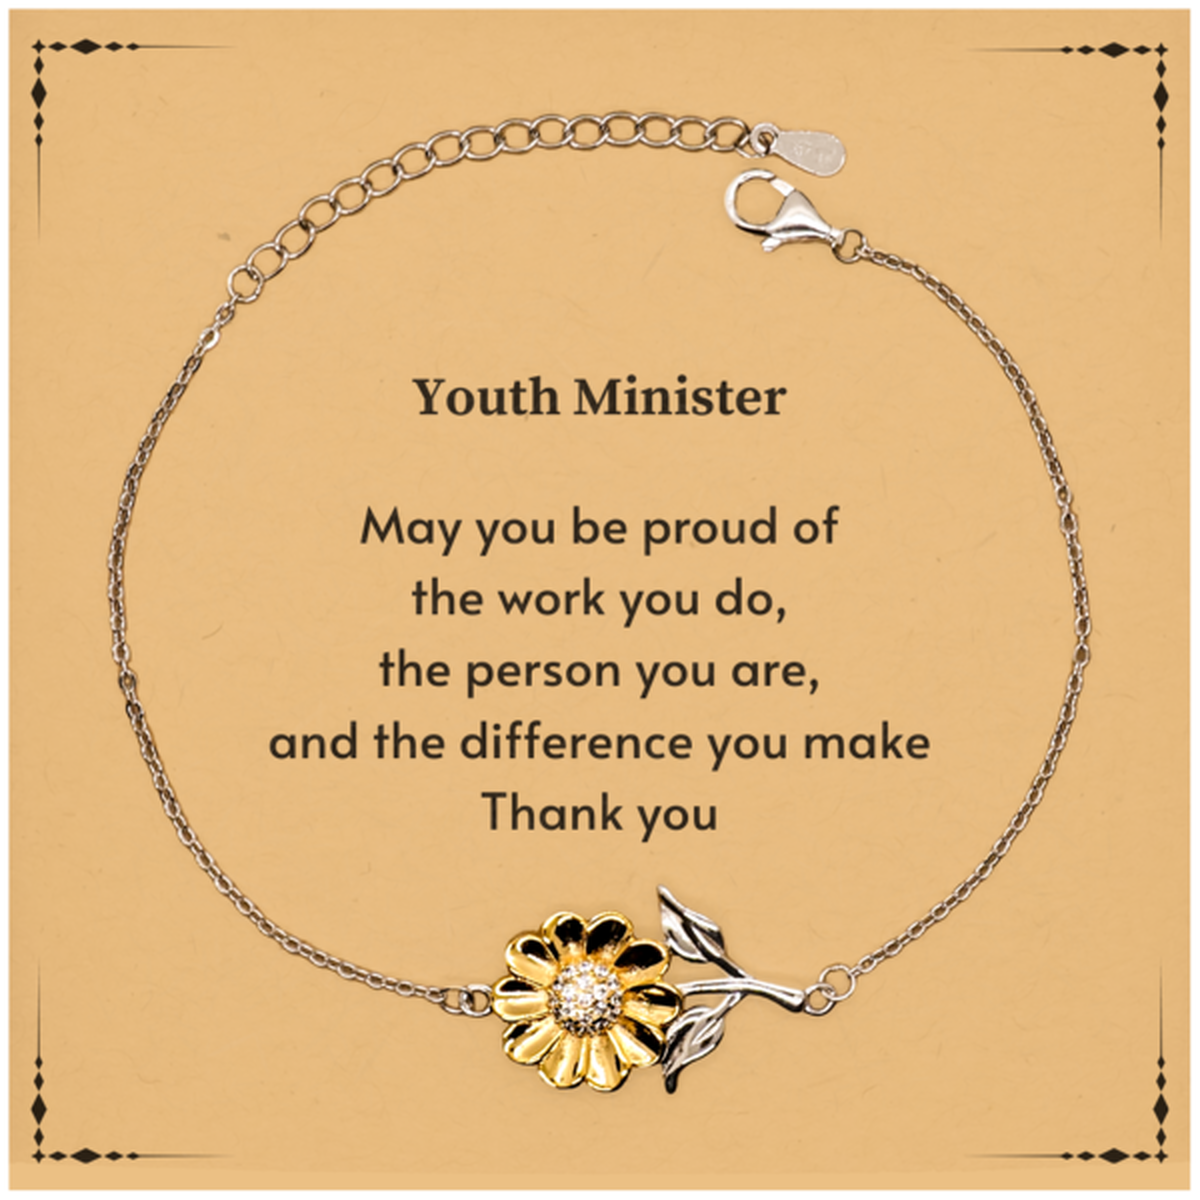 Heartwarming Sunflower Bracelet Retirement Coworkers Gifts for Youth Minister, Youth Minister May You be proud of the work you do, the person you are Gifts for Boss Men Women Friends